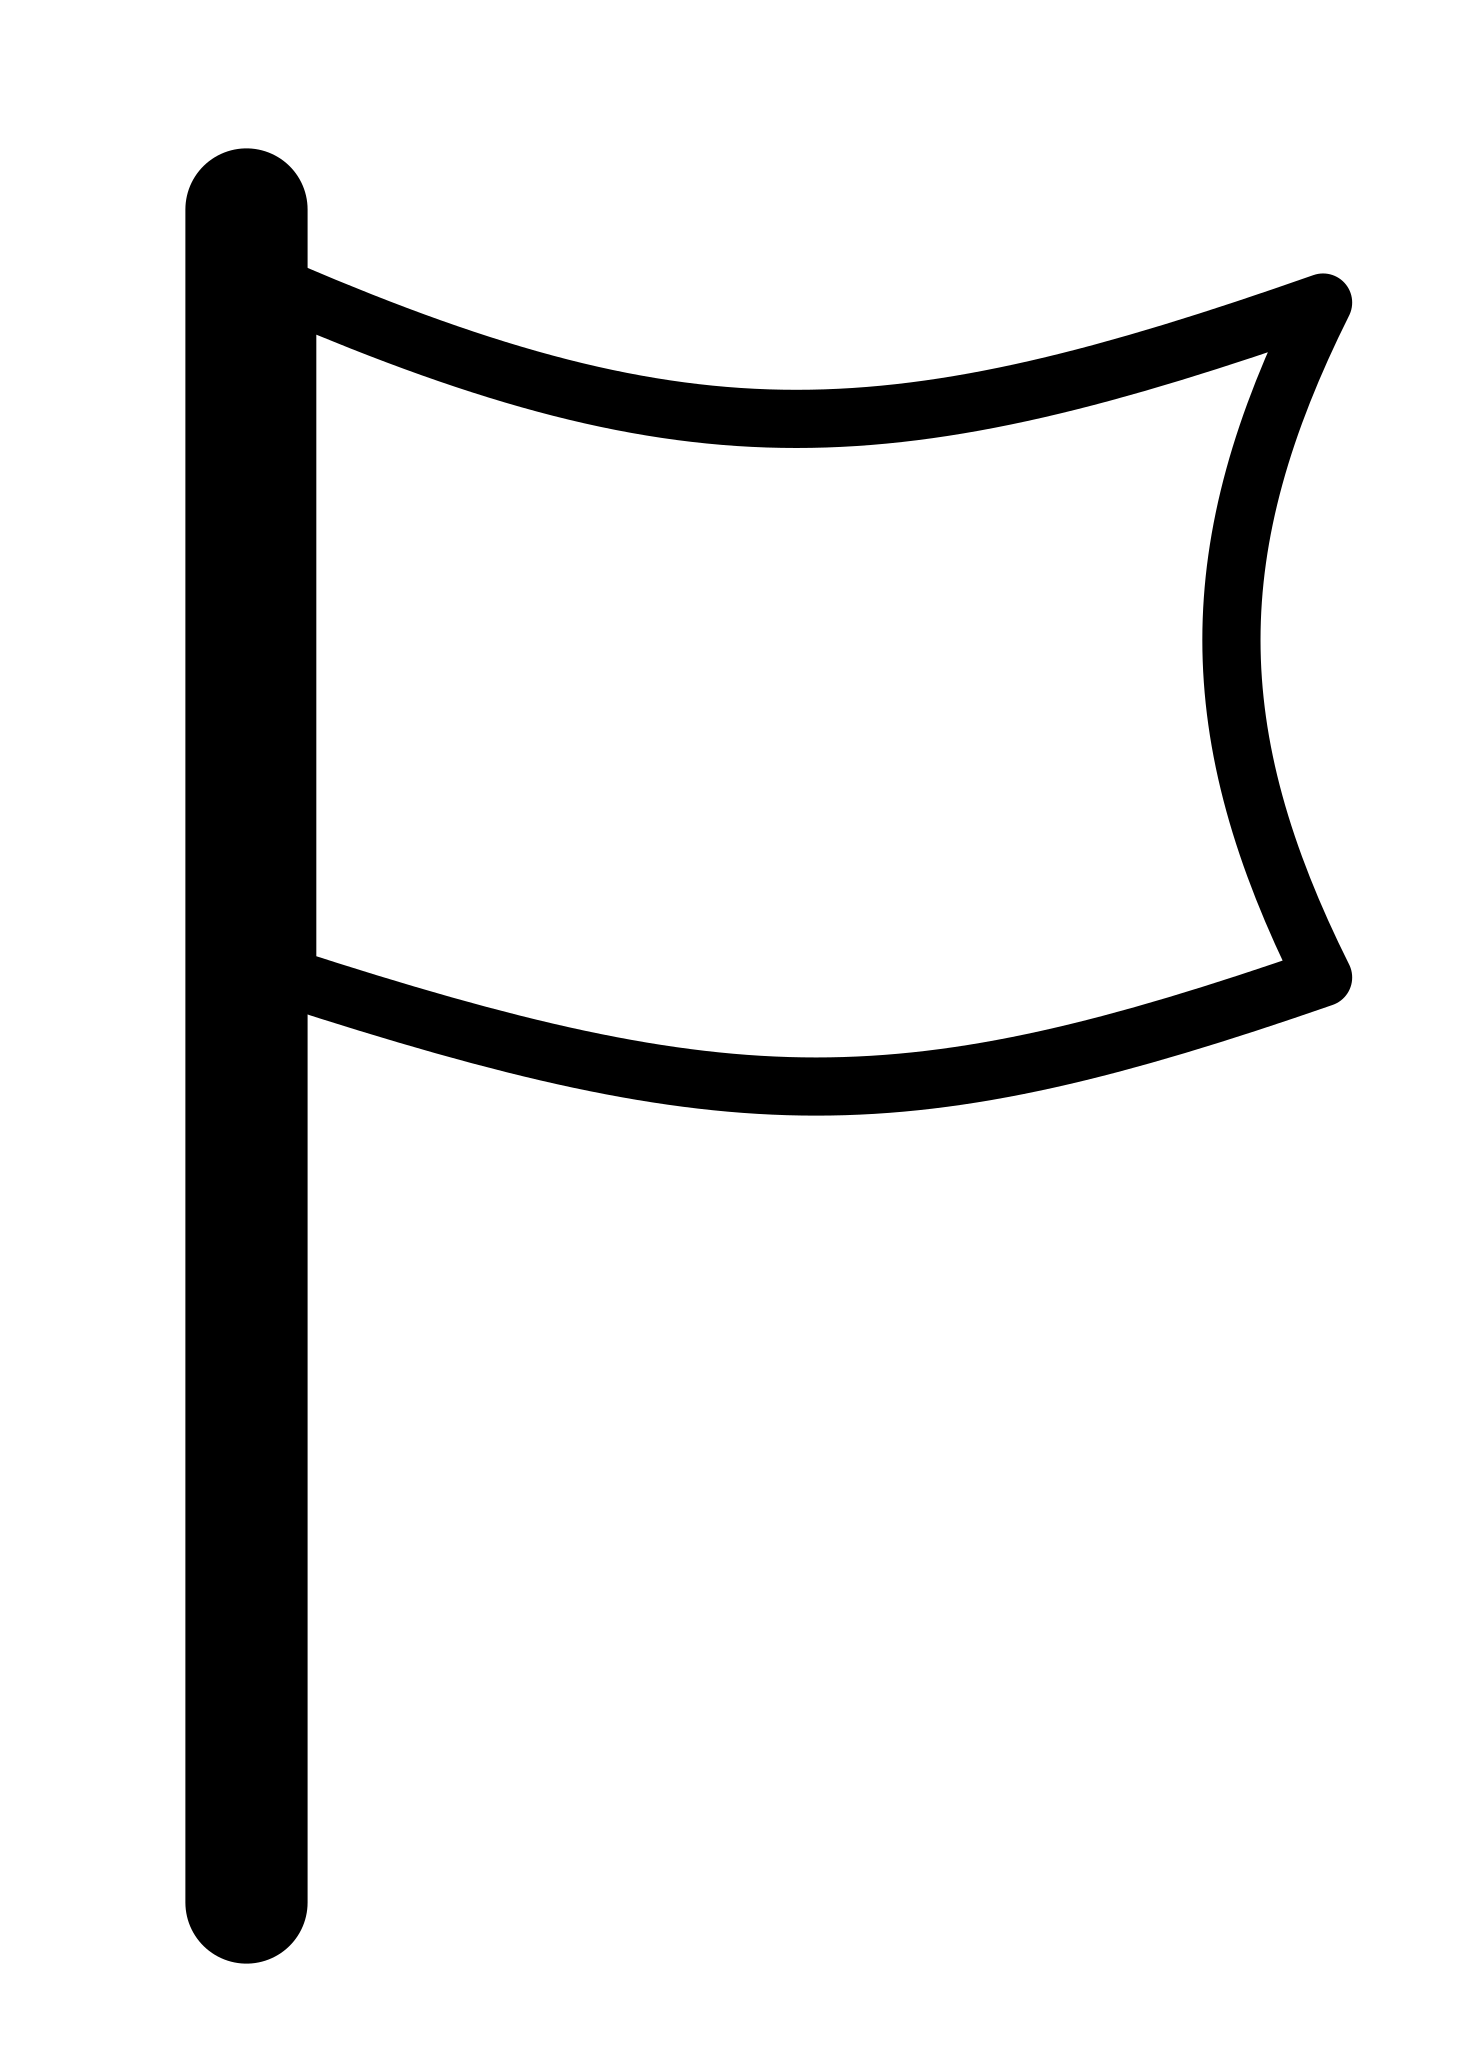 1459px-White_flag_icon.svg.png